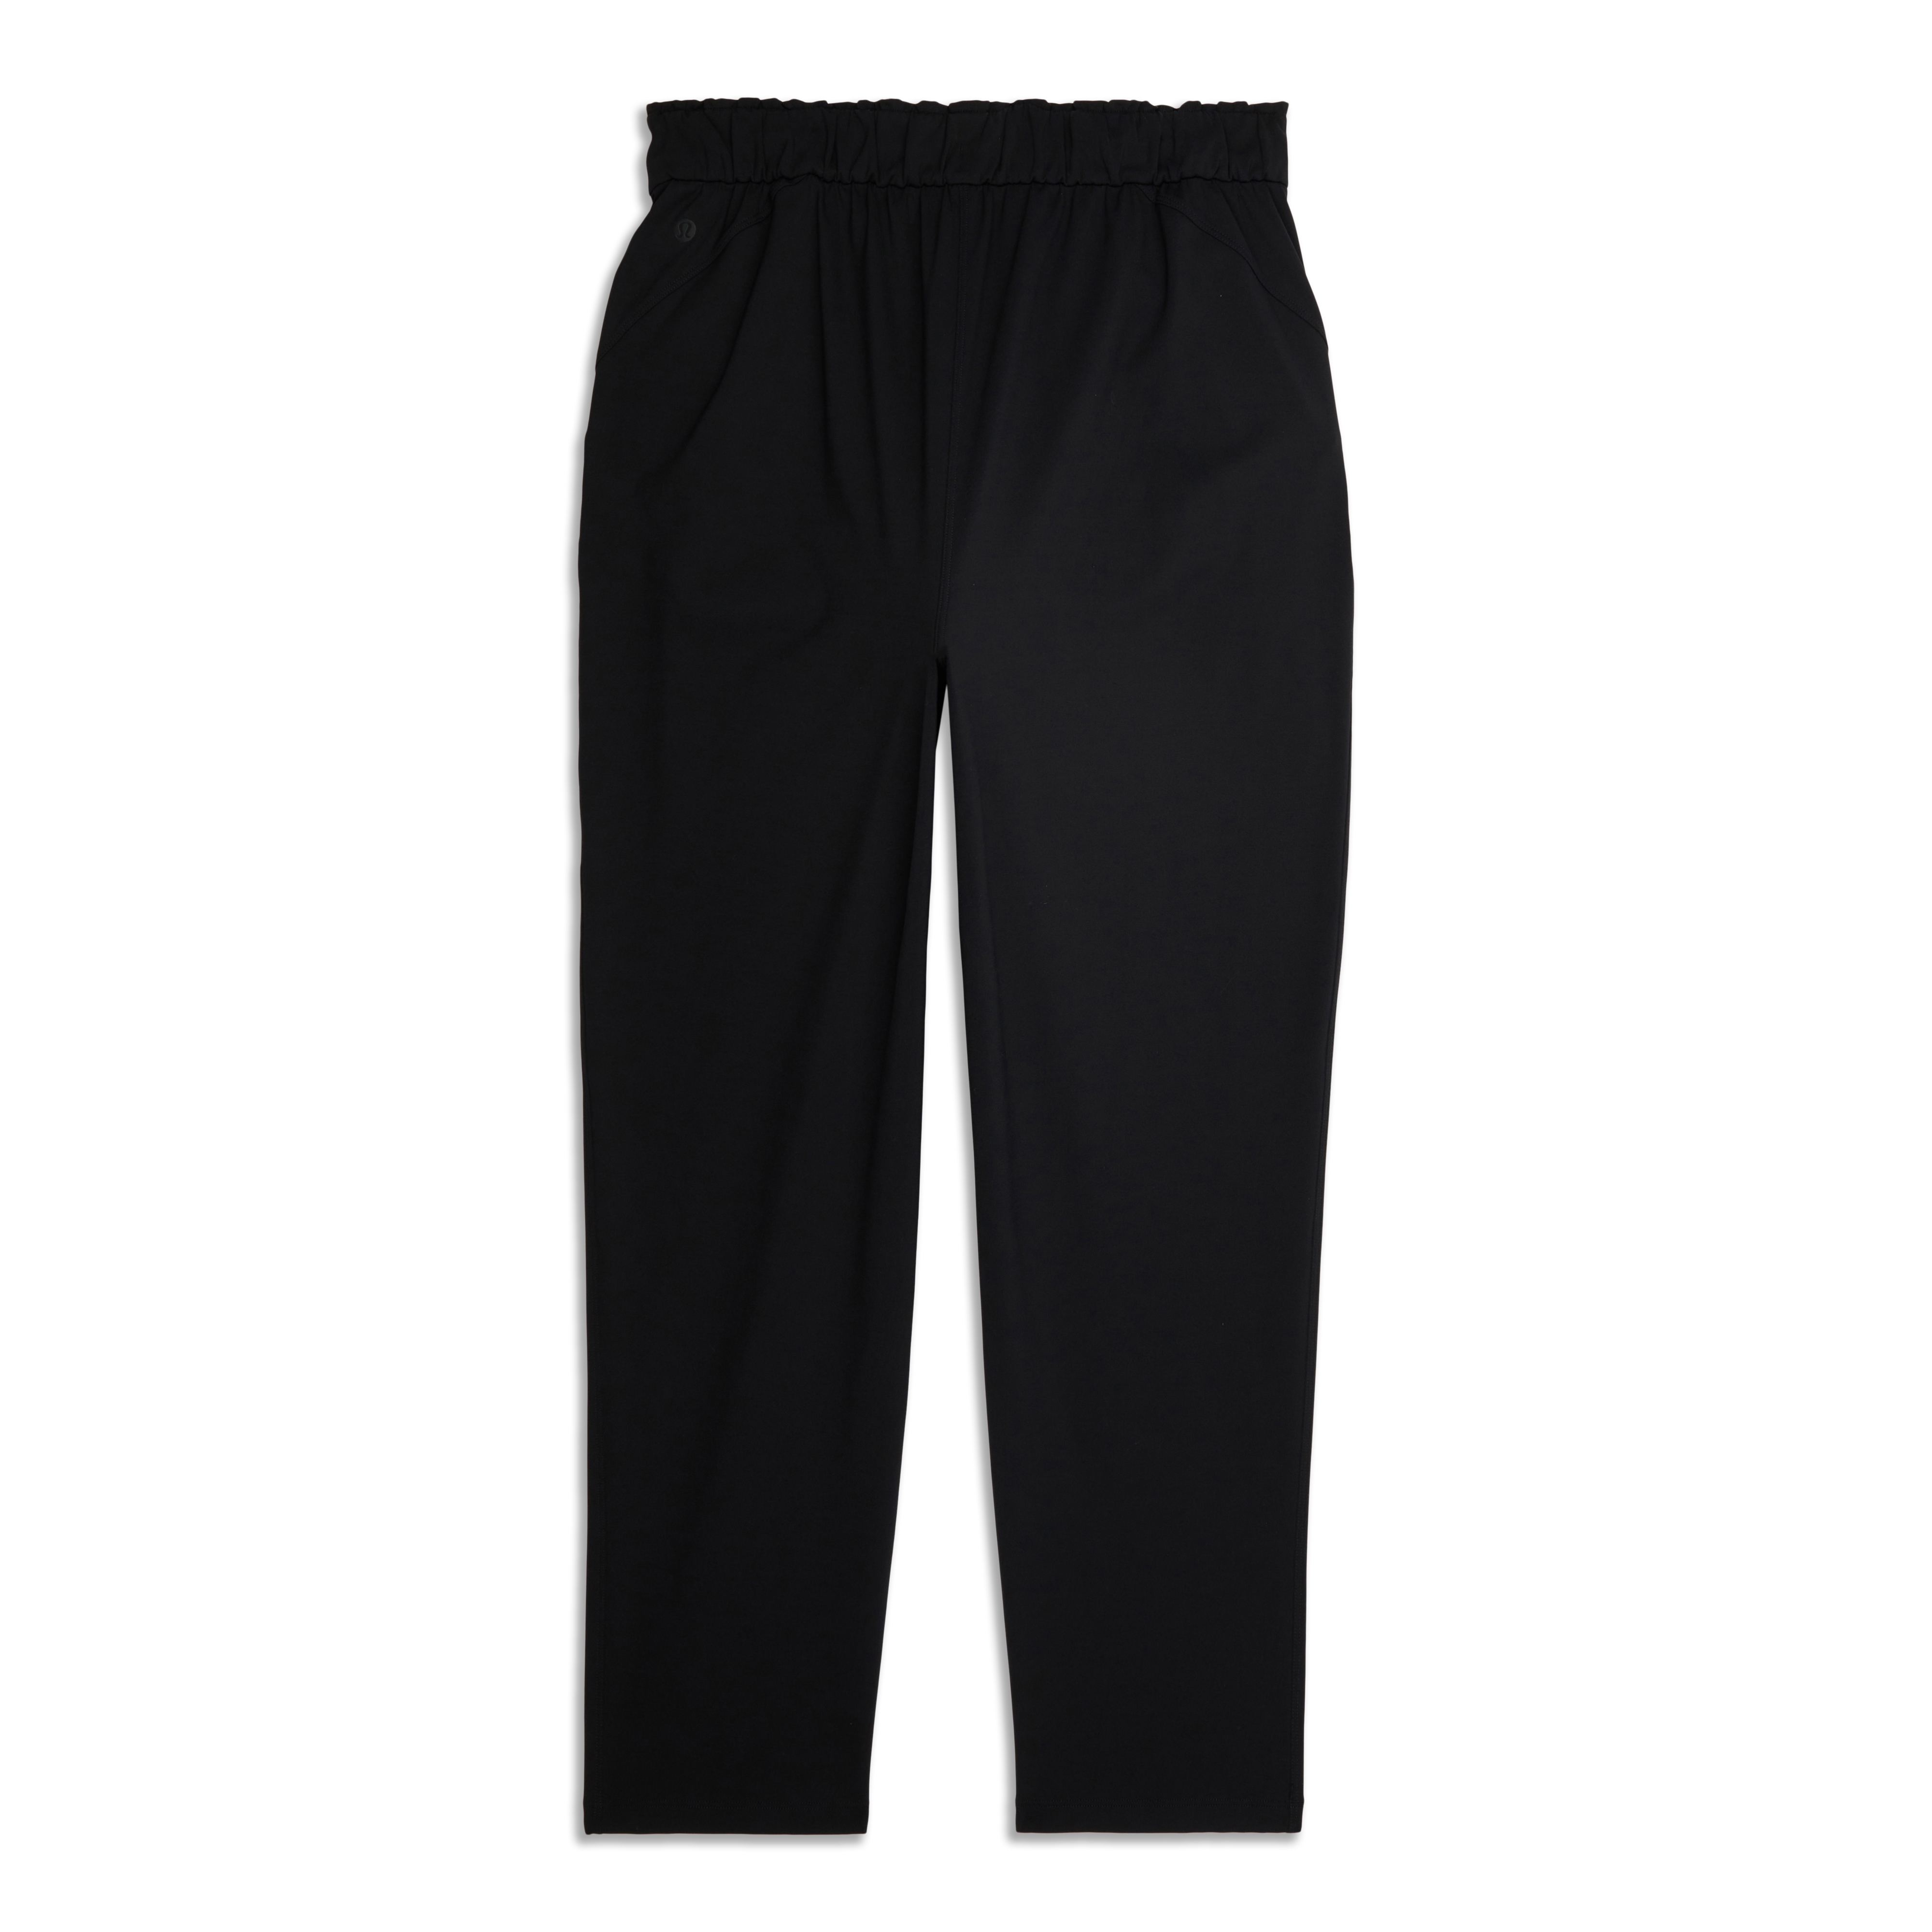 Lululemon Stretch High Rise 7/8 Pant SFDM Blue Women's 4 Relaxed